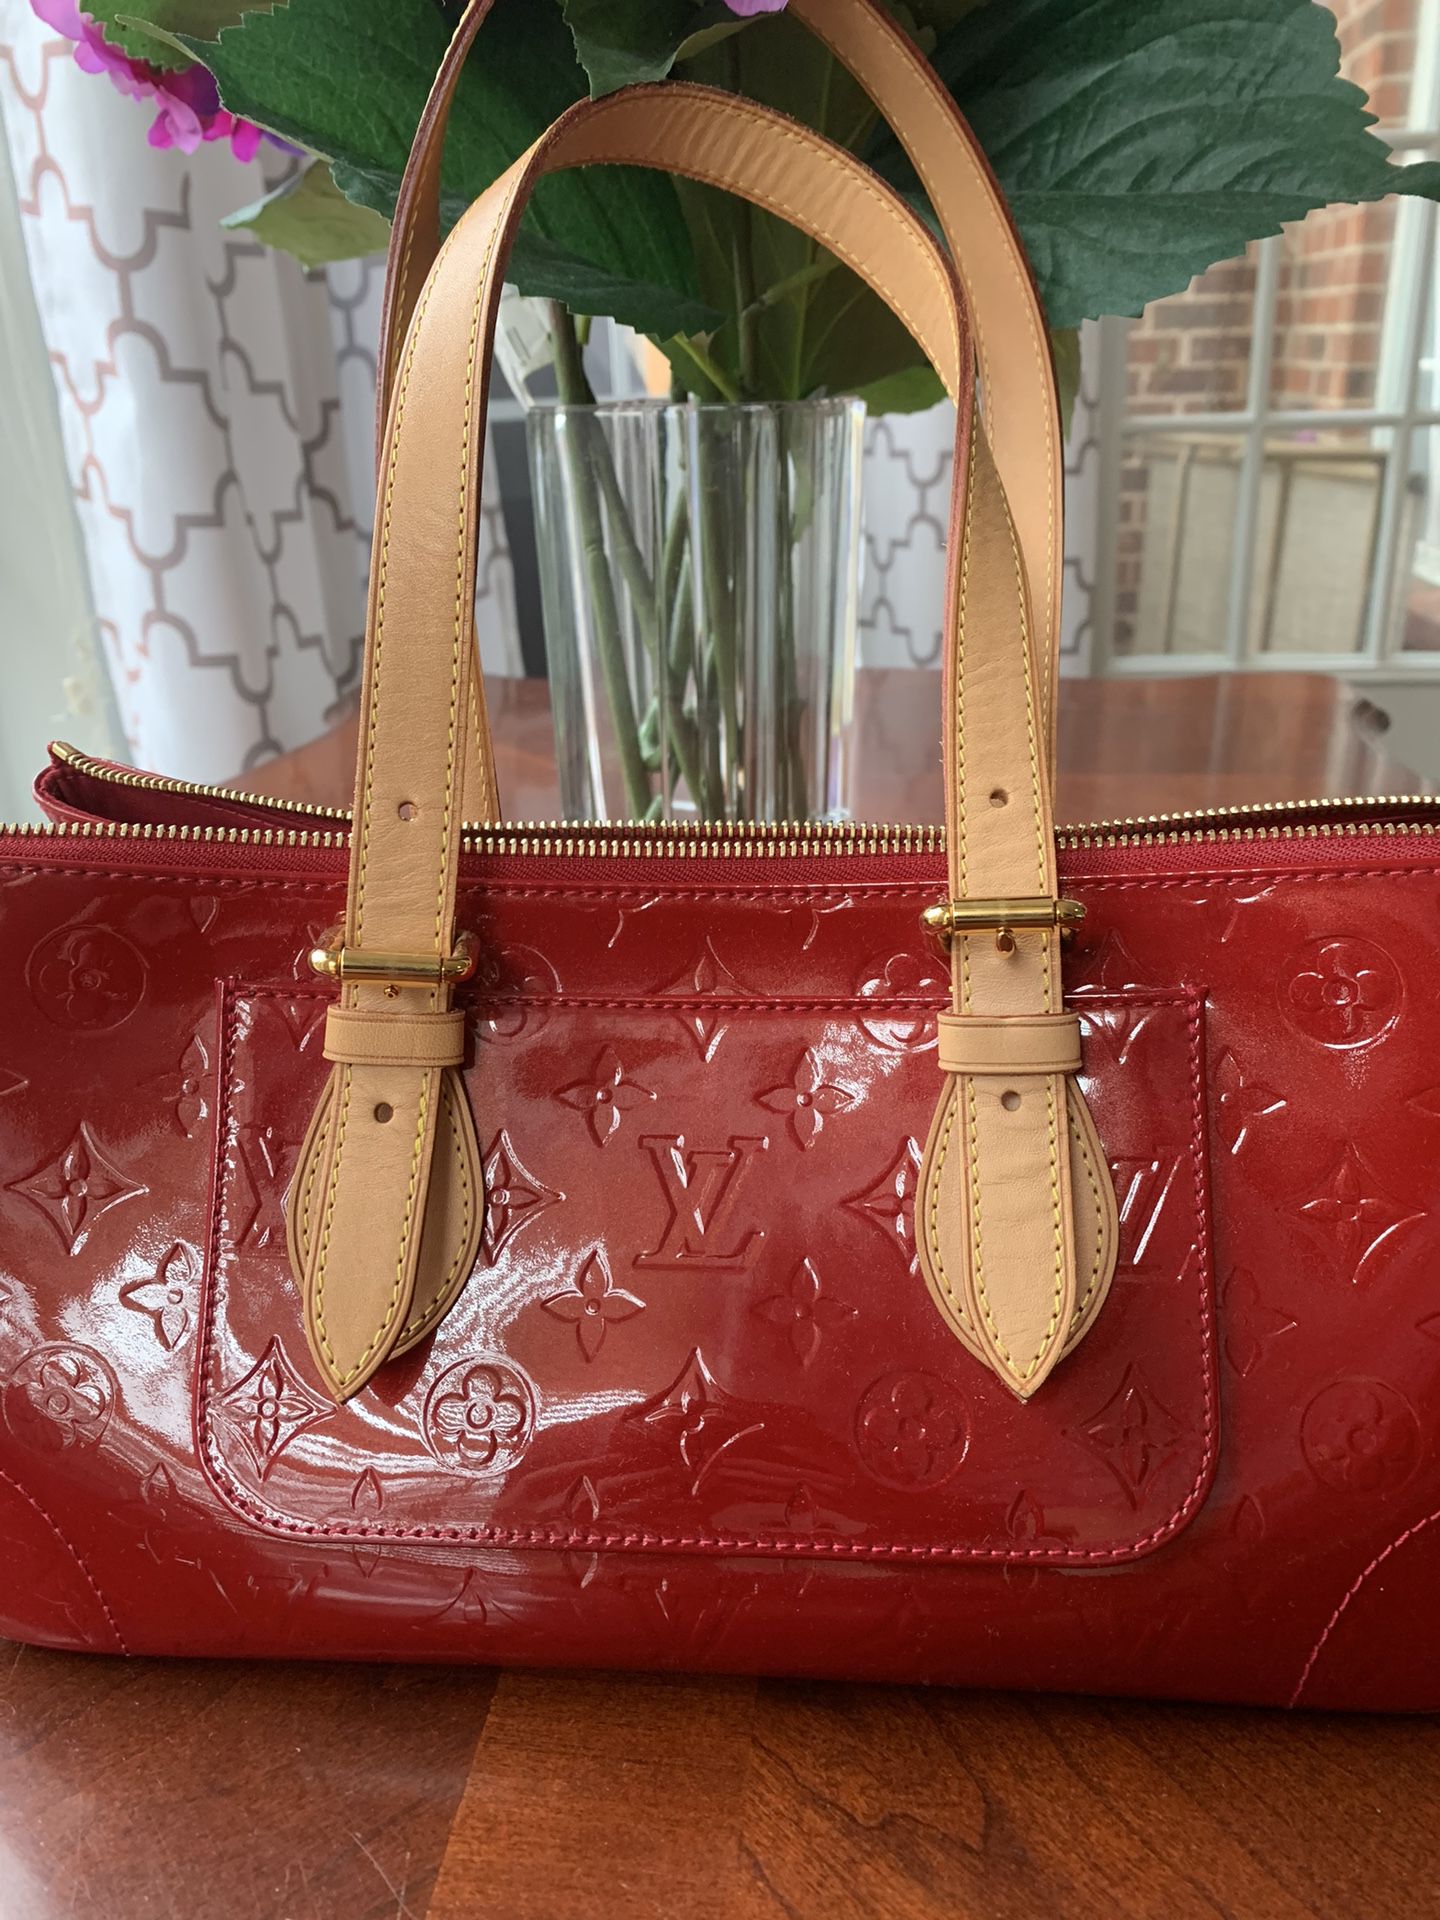 Louis Vuitton Vernis Rosewood for Sale in Shenandoah, TX - OfferUp